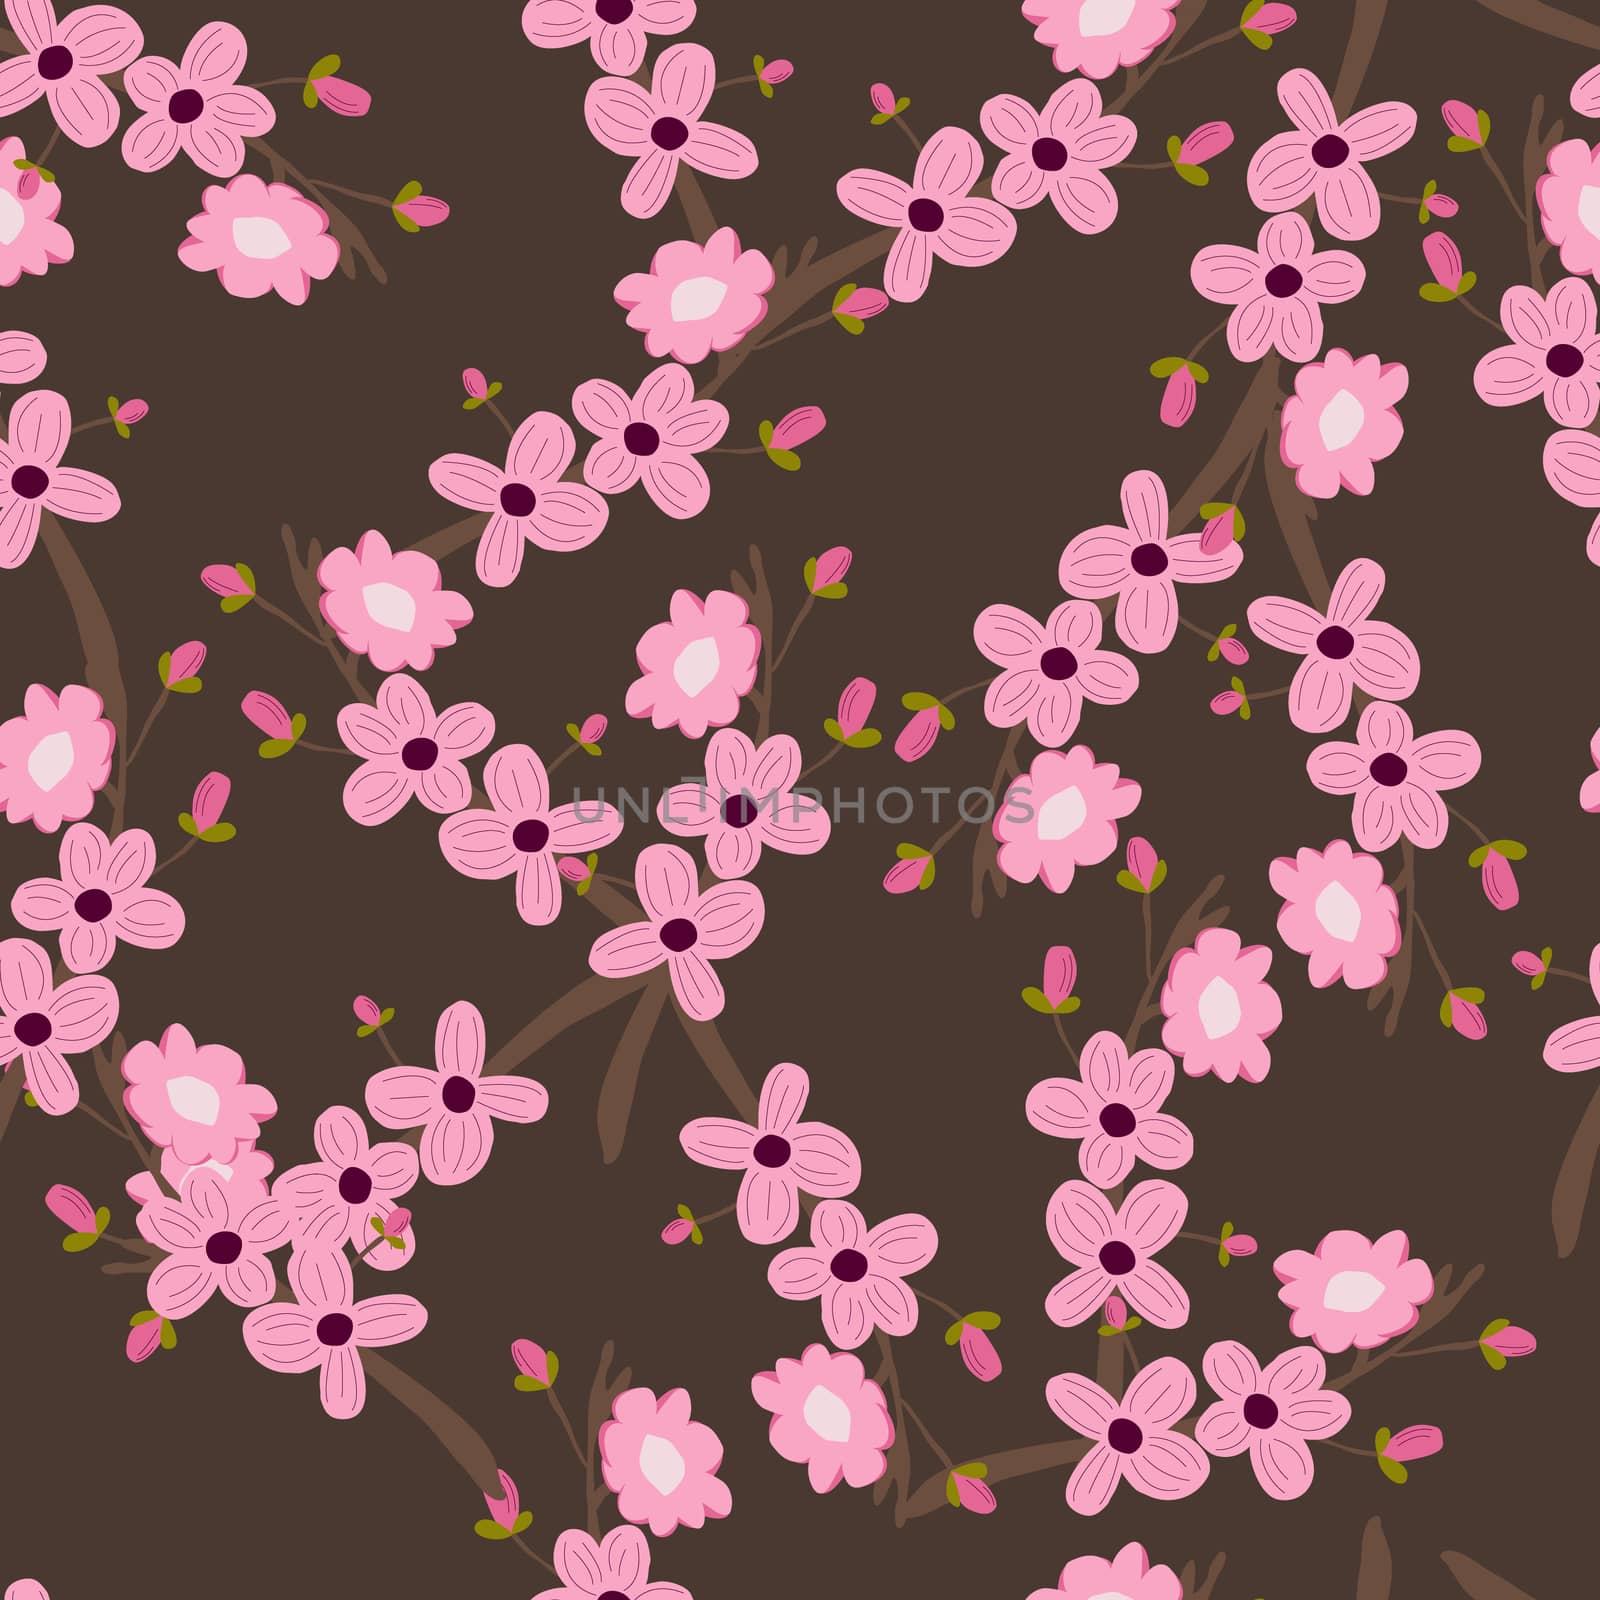 Seamless pattern with cherry blossom pink flowers on brown by Nata_Prando